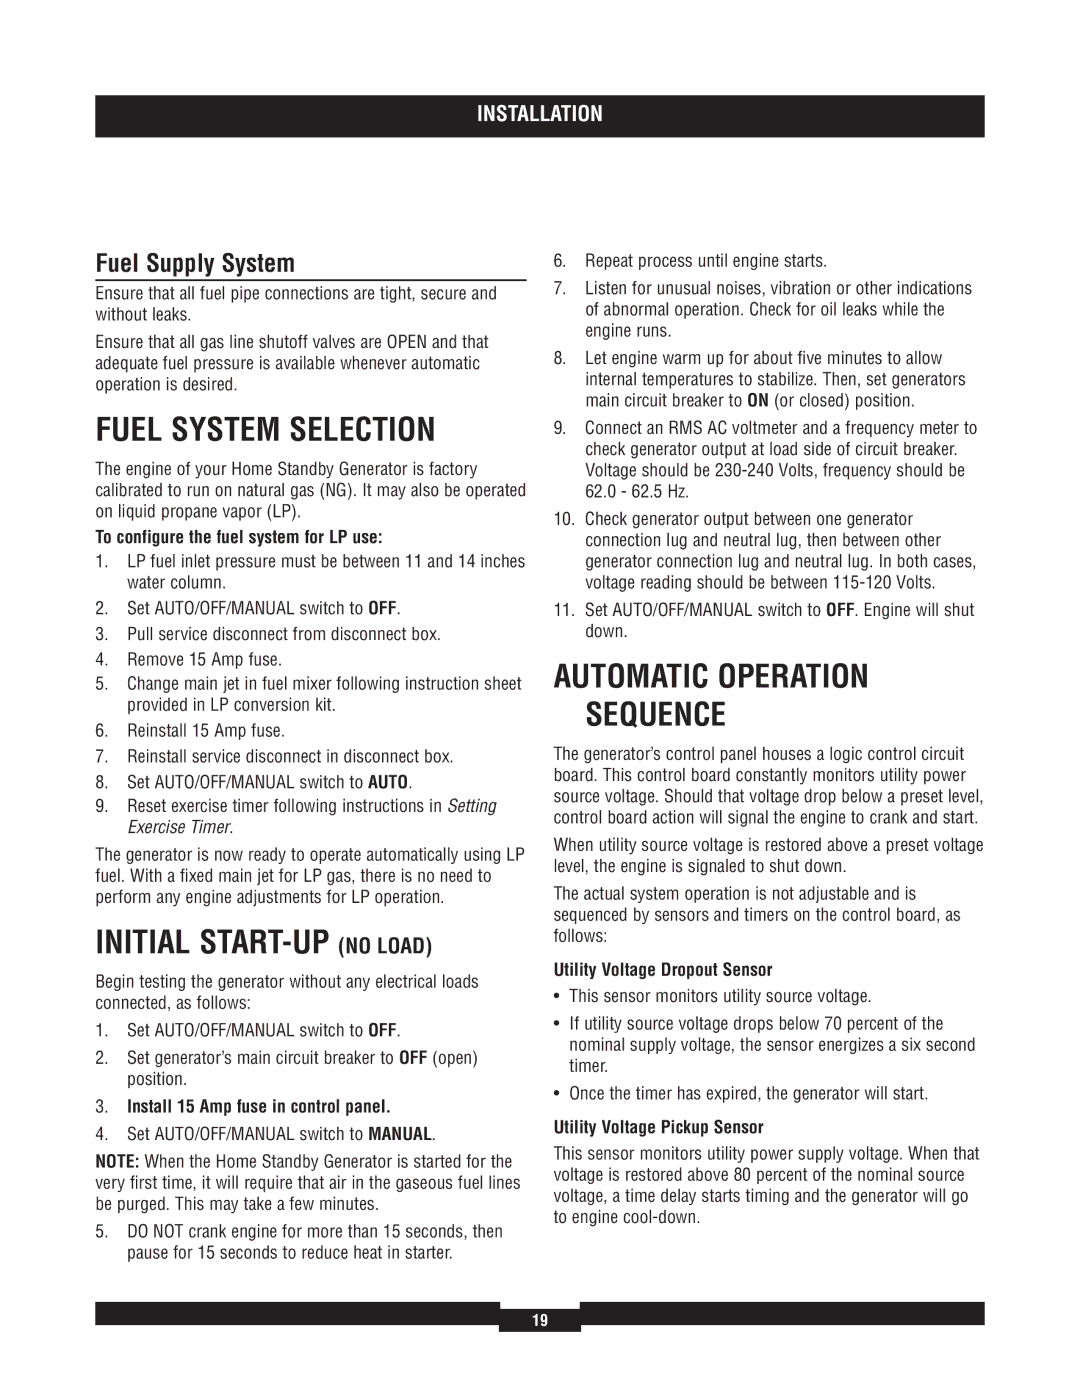 Briggs & Stratton 040220A manual Fuel System Selection, Initial START-UP no Load, Automatic Operation Sequence 